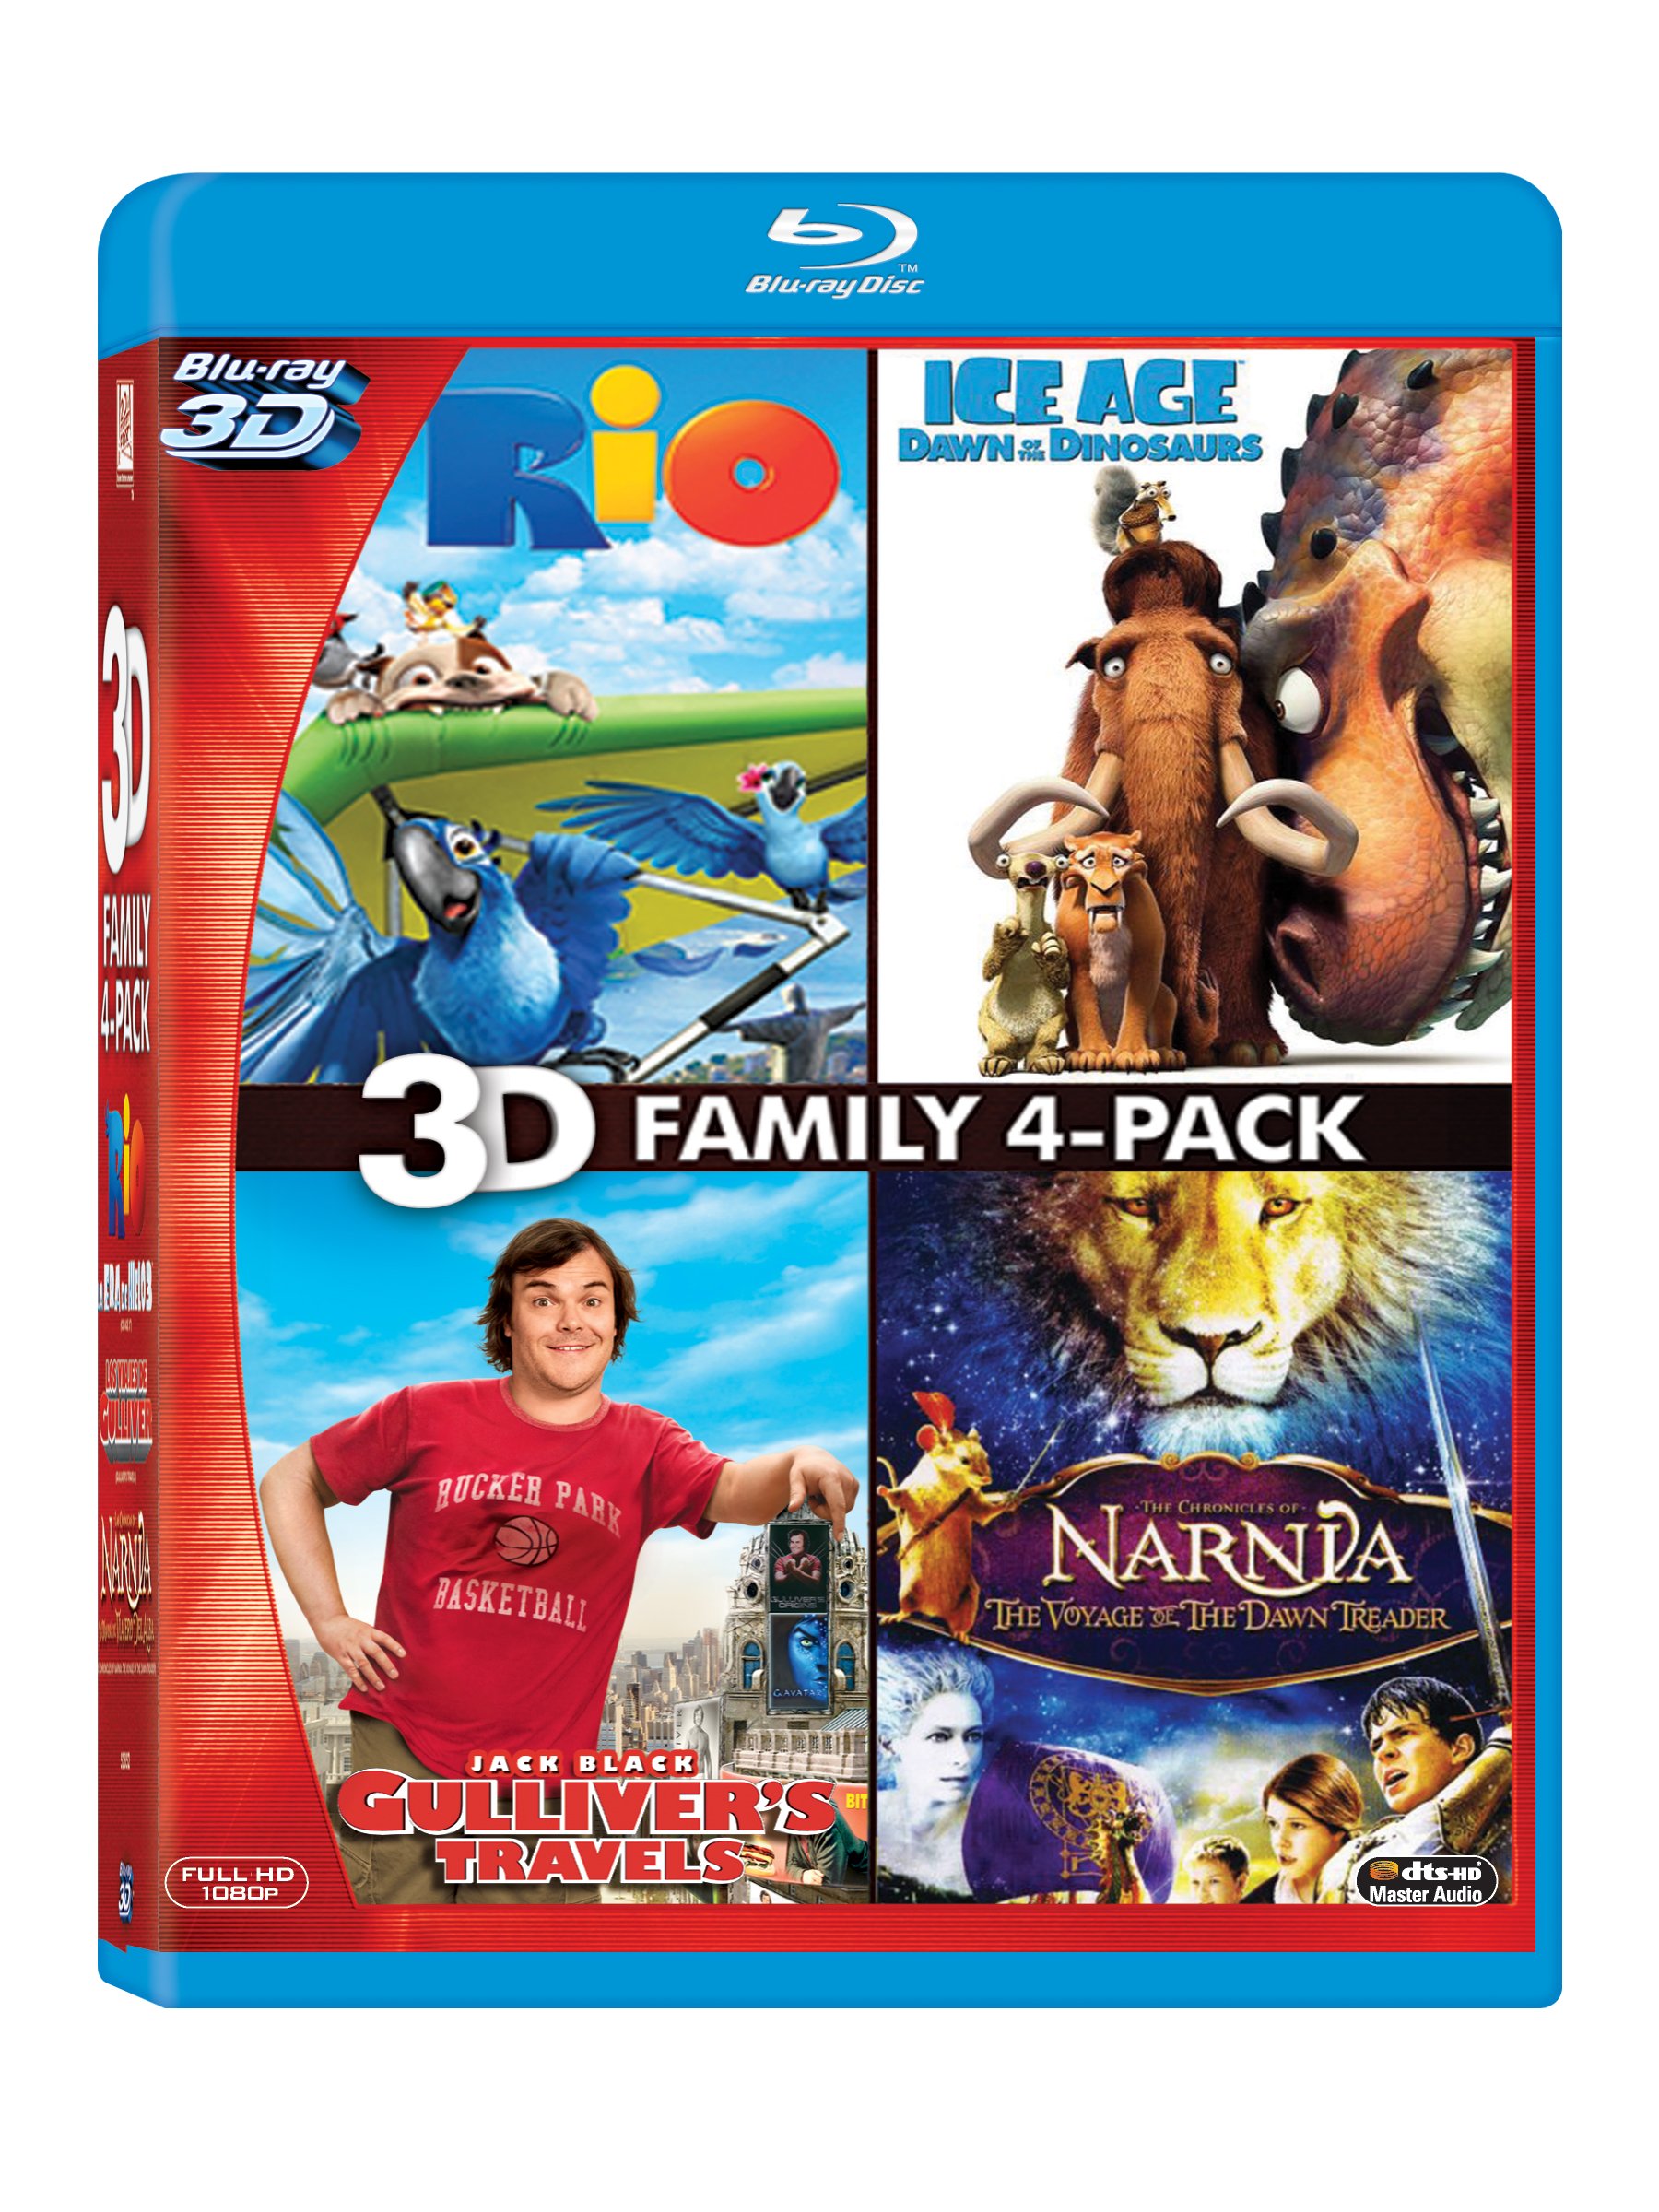 3d-family-pack-rio-ice-age-dawn-of-the-dinosaurs-gullivers-travels-the-chronicles-of-narnia-the-voyage-of-the-dawn-treader-4-disc-box-set